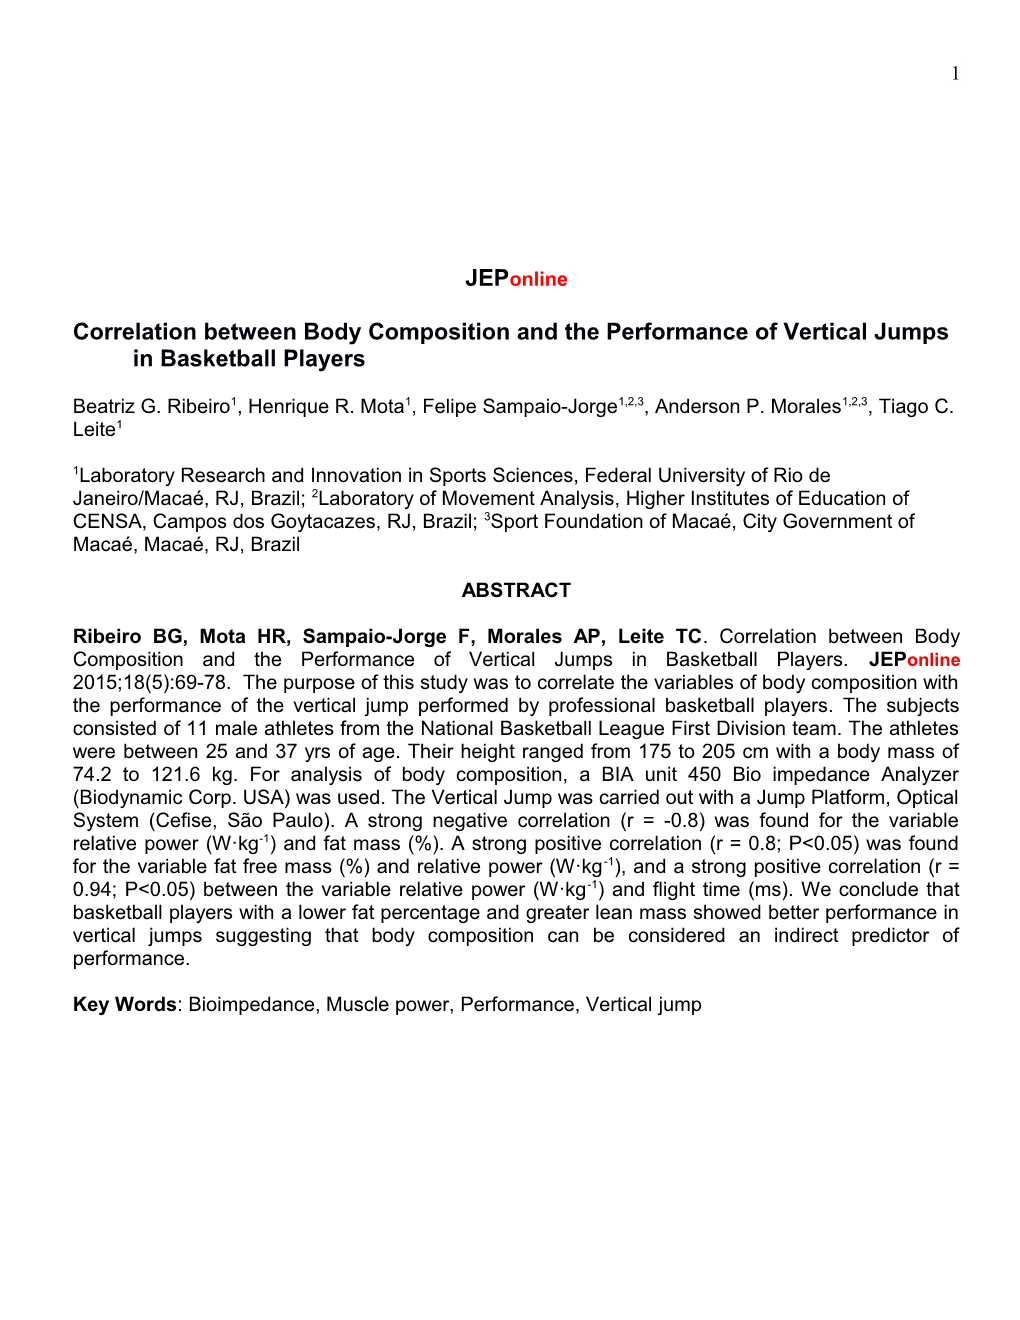 Correlation Between Body Composition and the Performance of Vertical Jumps in Basketball Players